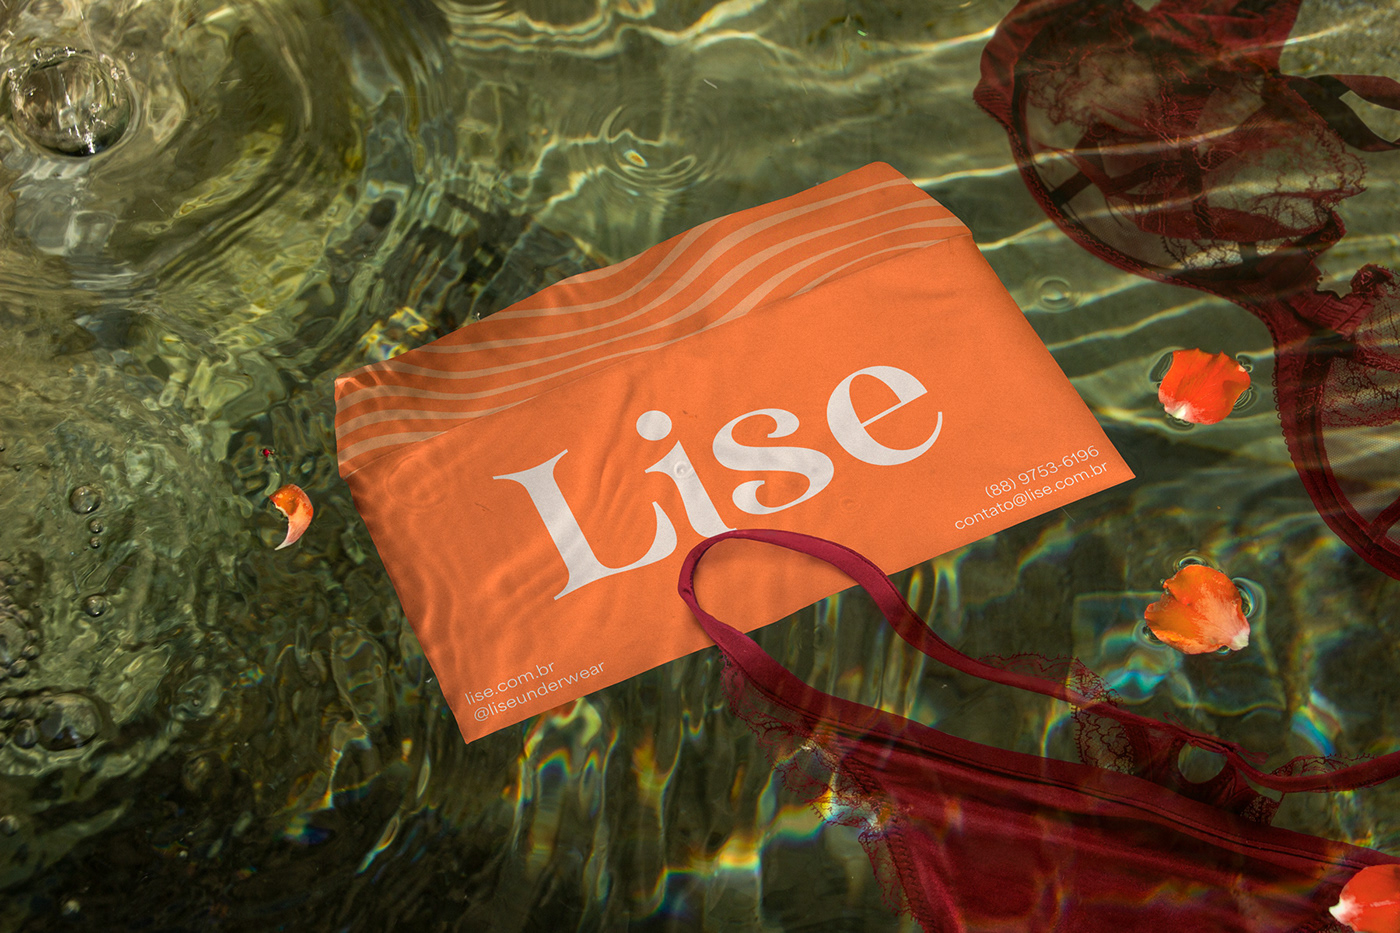 Orange envelope floating in crystal clear water with lingerie next to it.